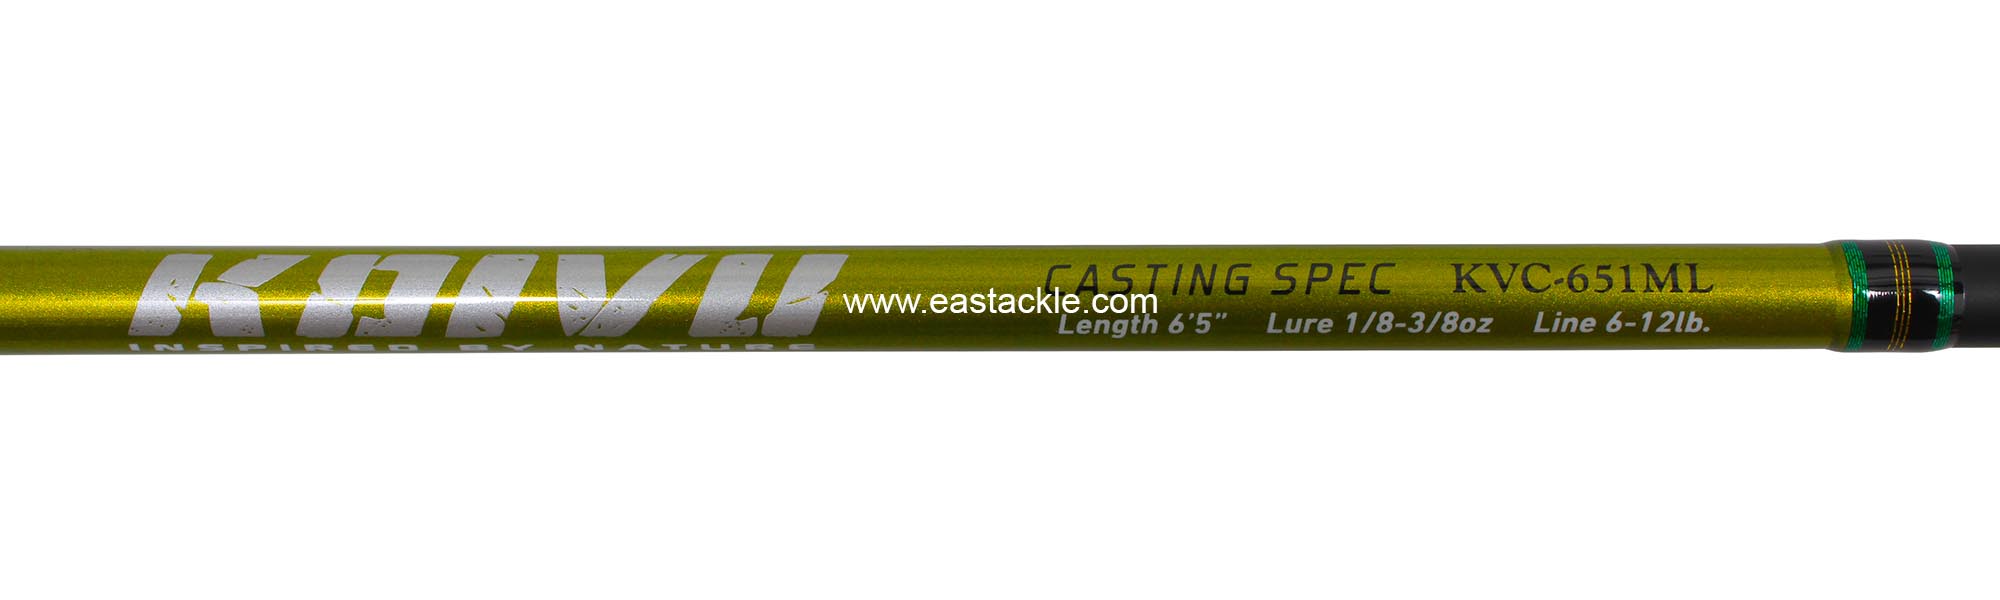 Rapala - Koivu - KVC651ML - Bait Casting Rod - Blank Specifications (Top View) | Eastackle